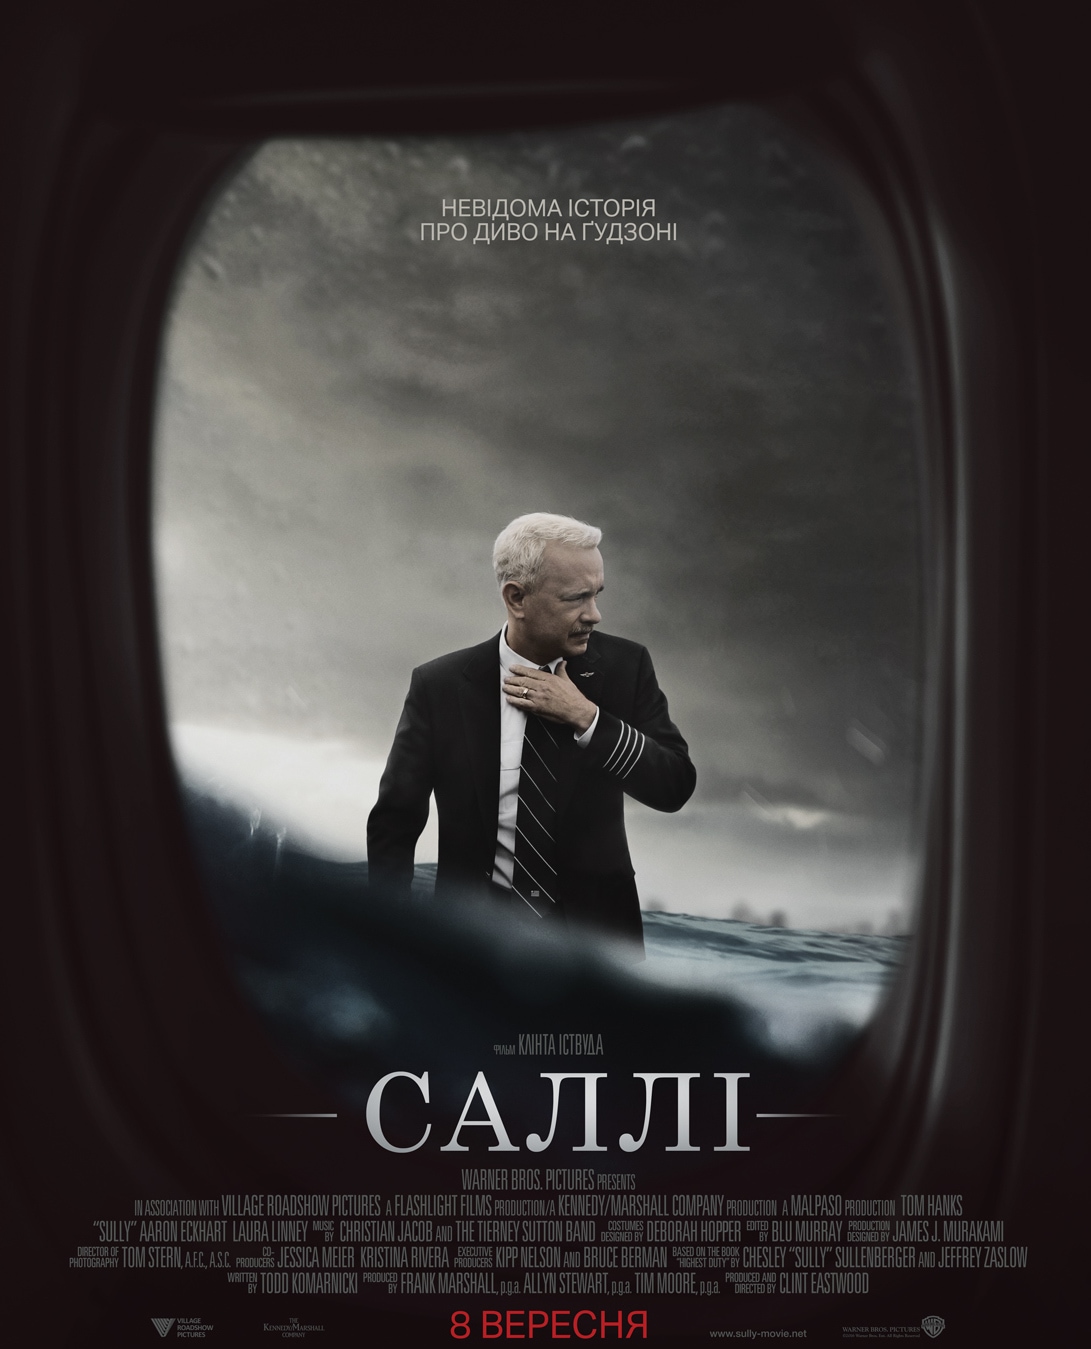 Саллі / Sully (2016) BDRip Ukr/Eng | sub Eng